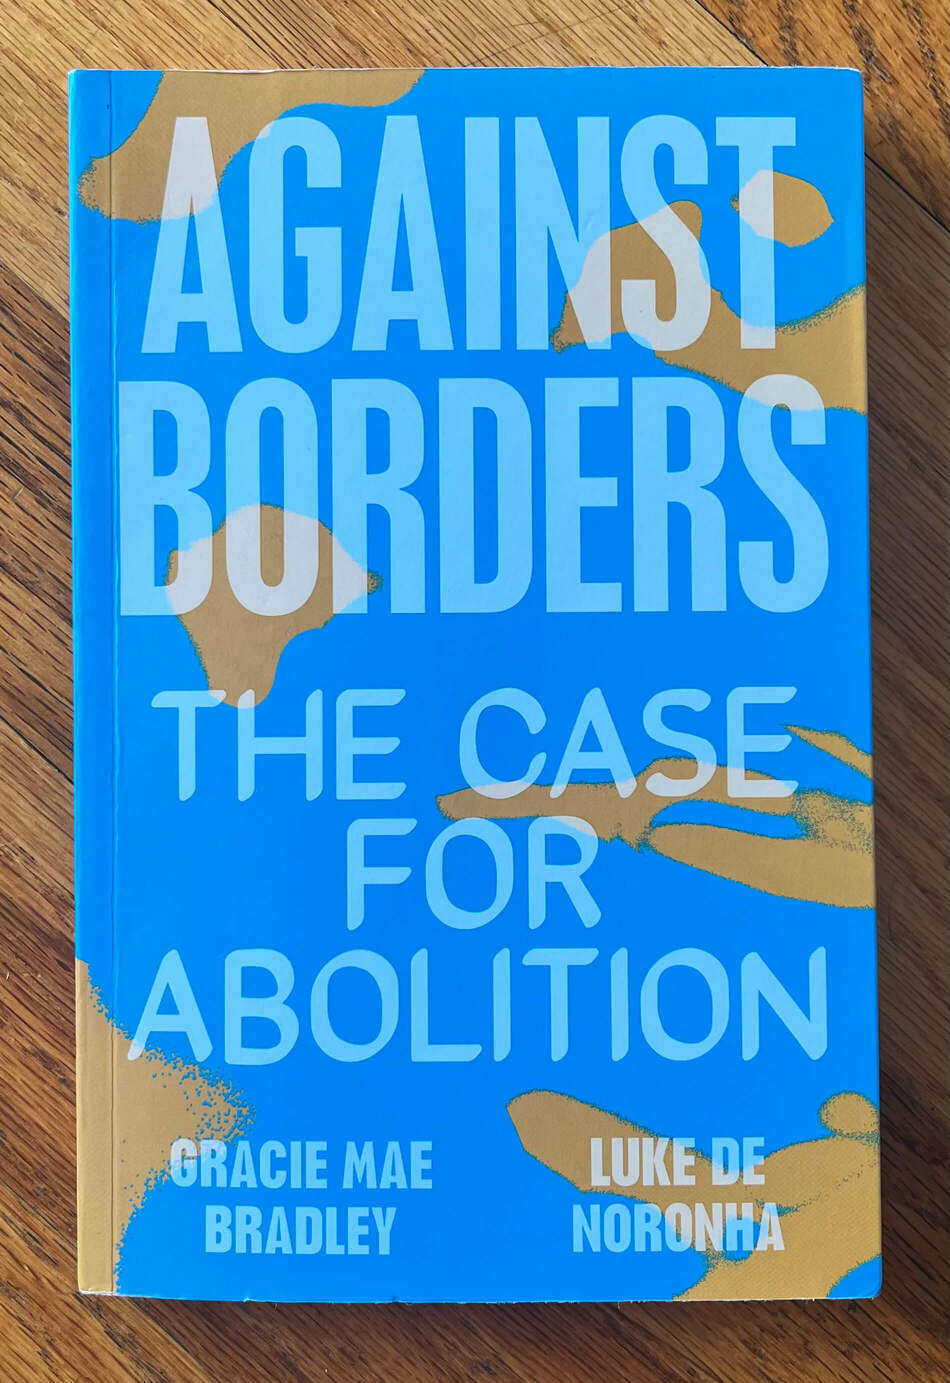 “Against Borders: The Case for Abolition” by Gracie Mae Bradley and Luke De Noronha